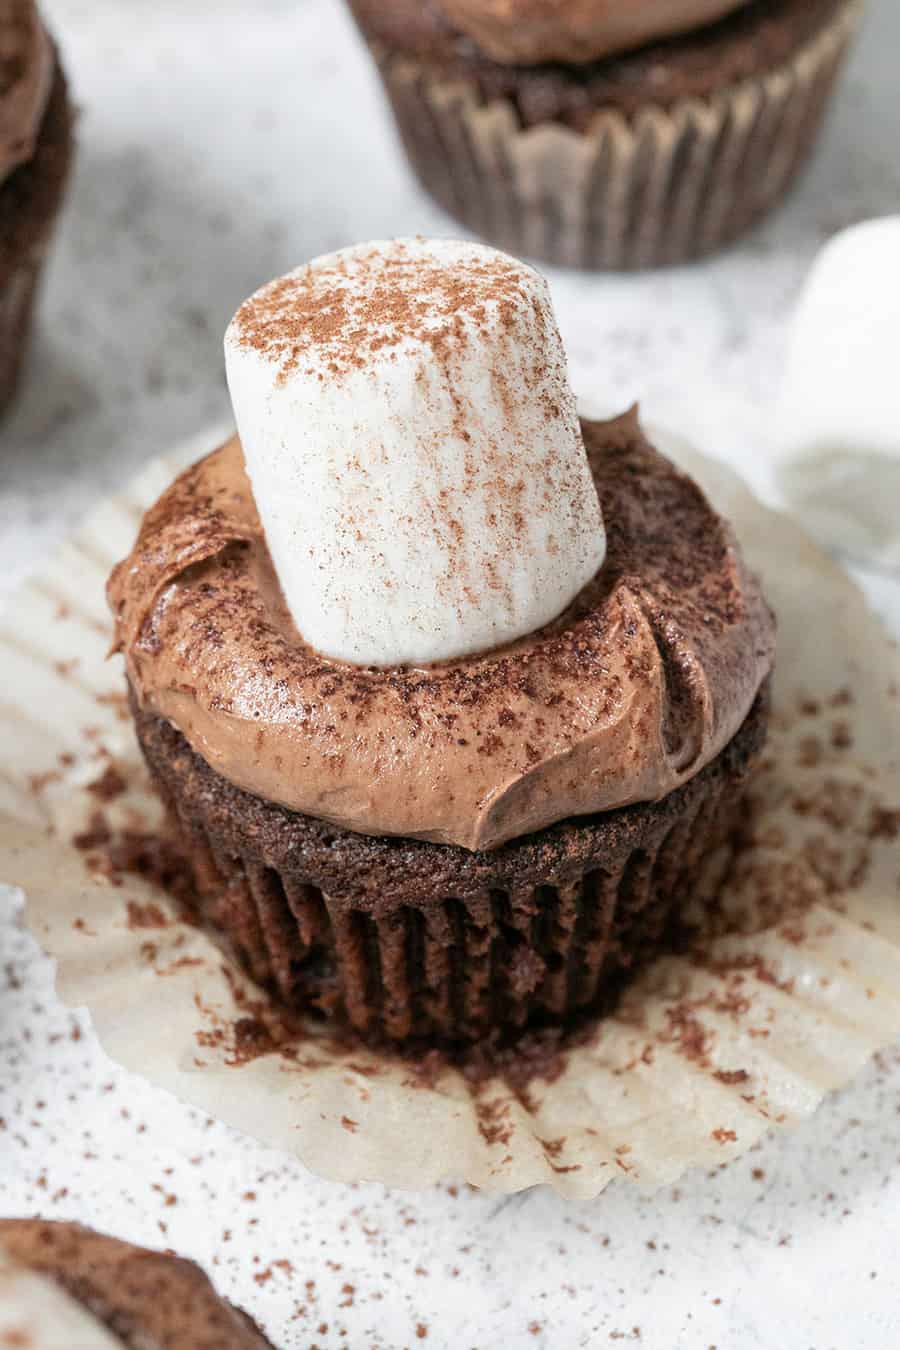 Chocolate cupcake with large marshmallow and chocolate frosting